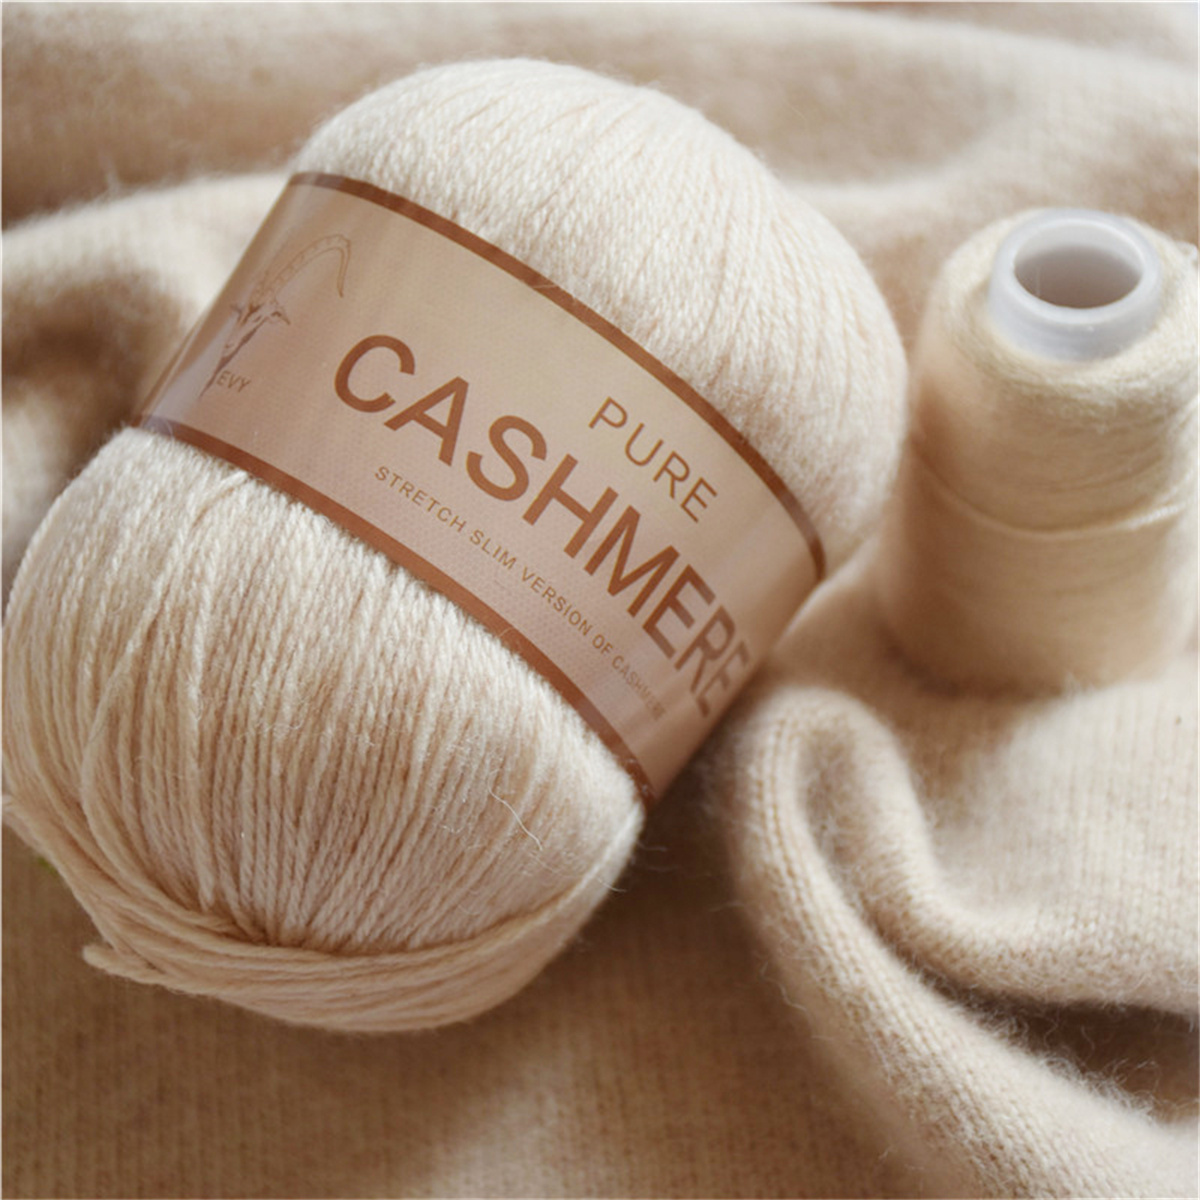 100% cashmere yarn on cone, italian pure cashmere yarn, lace weight yarn  for knitting, weaving and crochet, per 100g